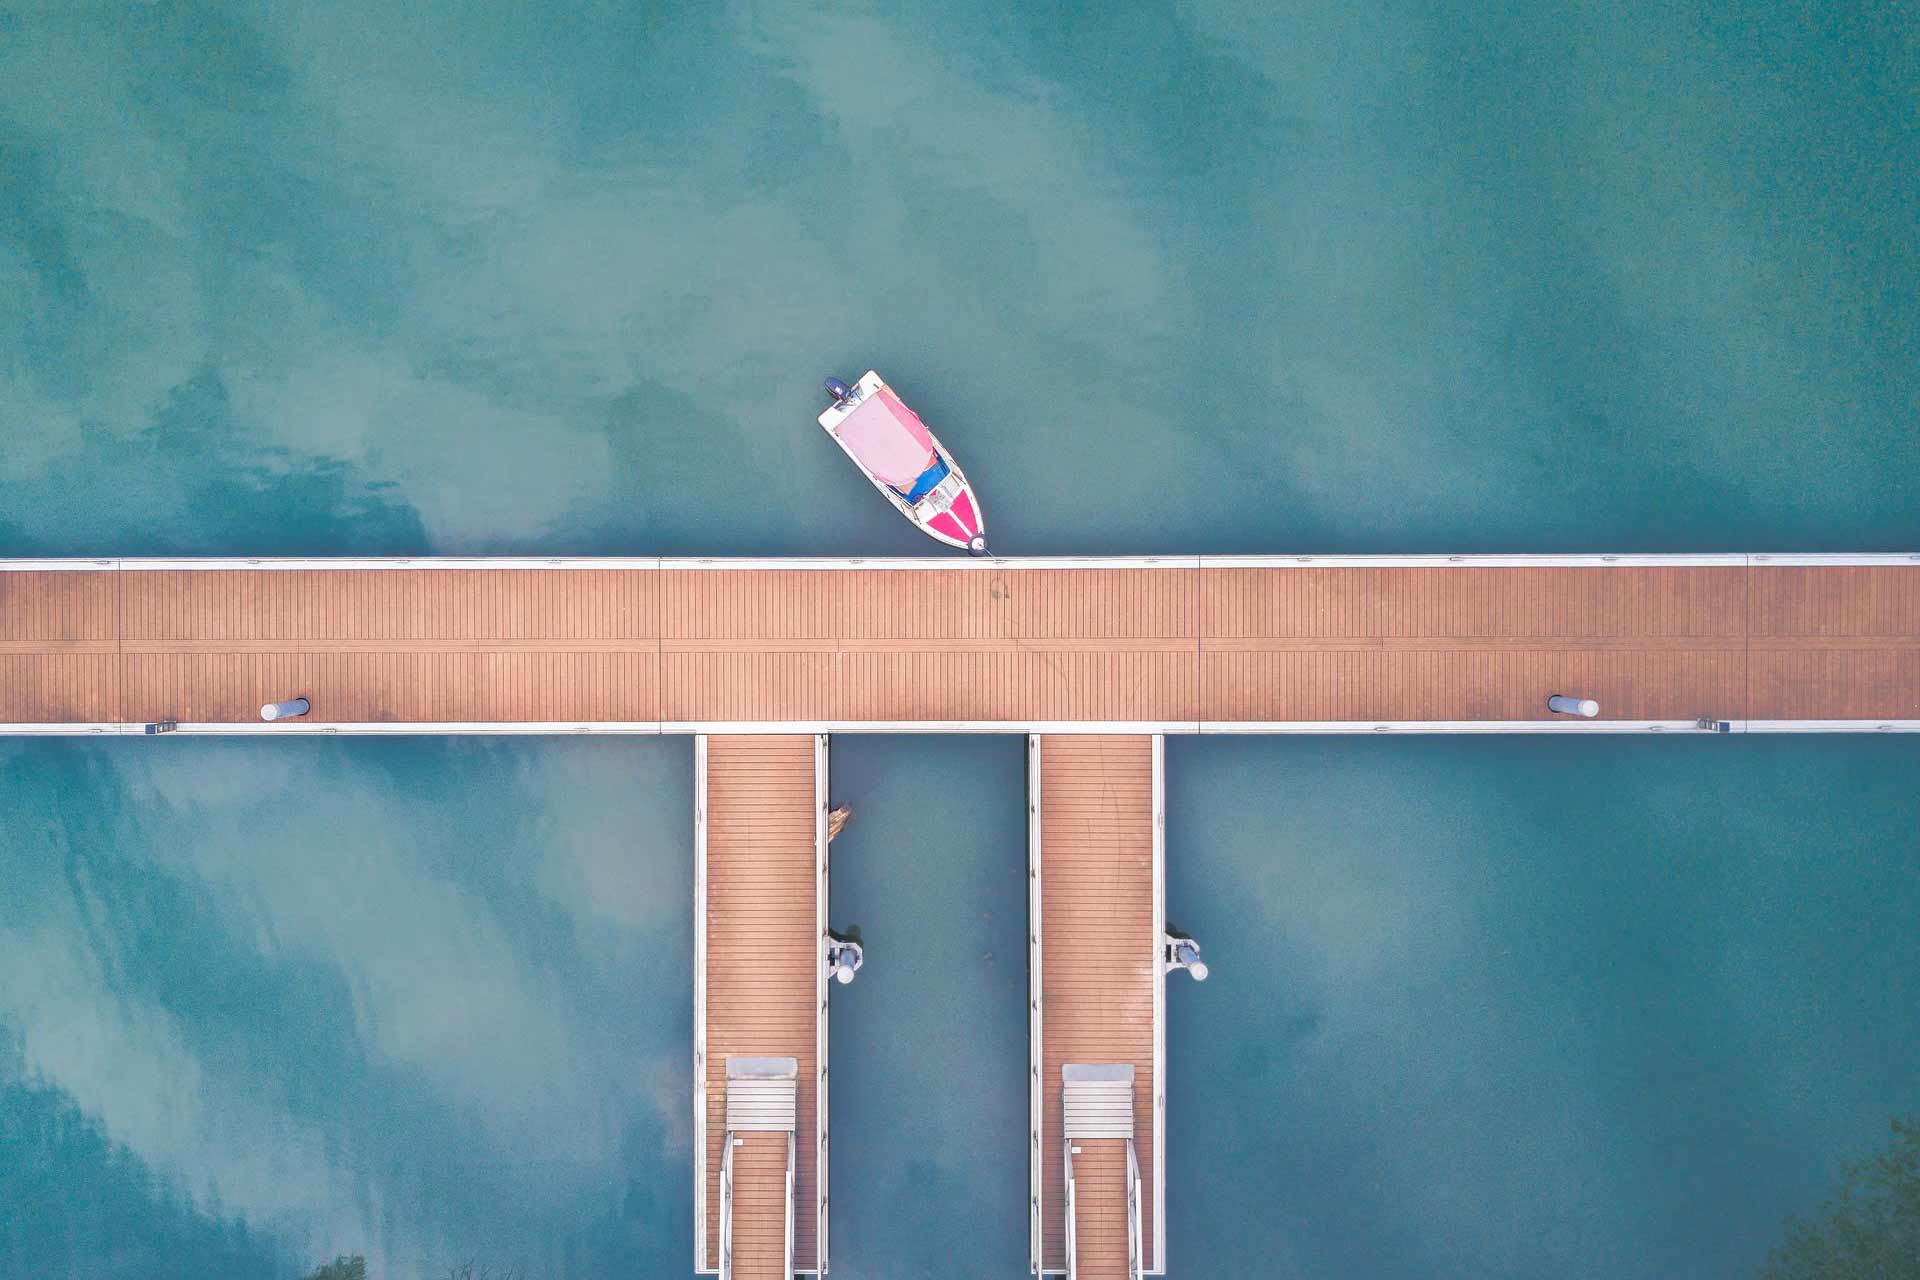 Bird's eye view from a boat moored to a wooden jetty